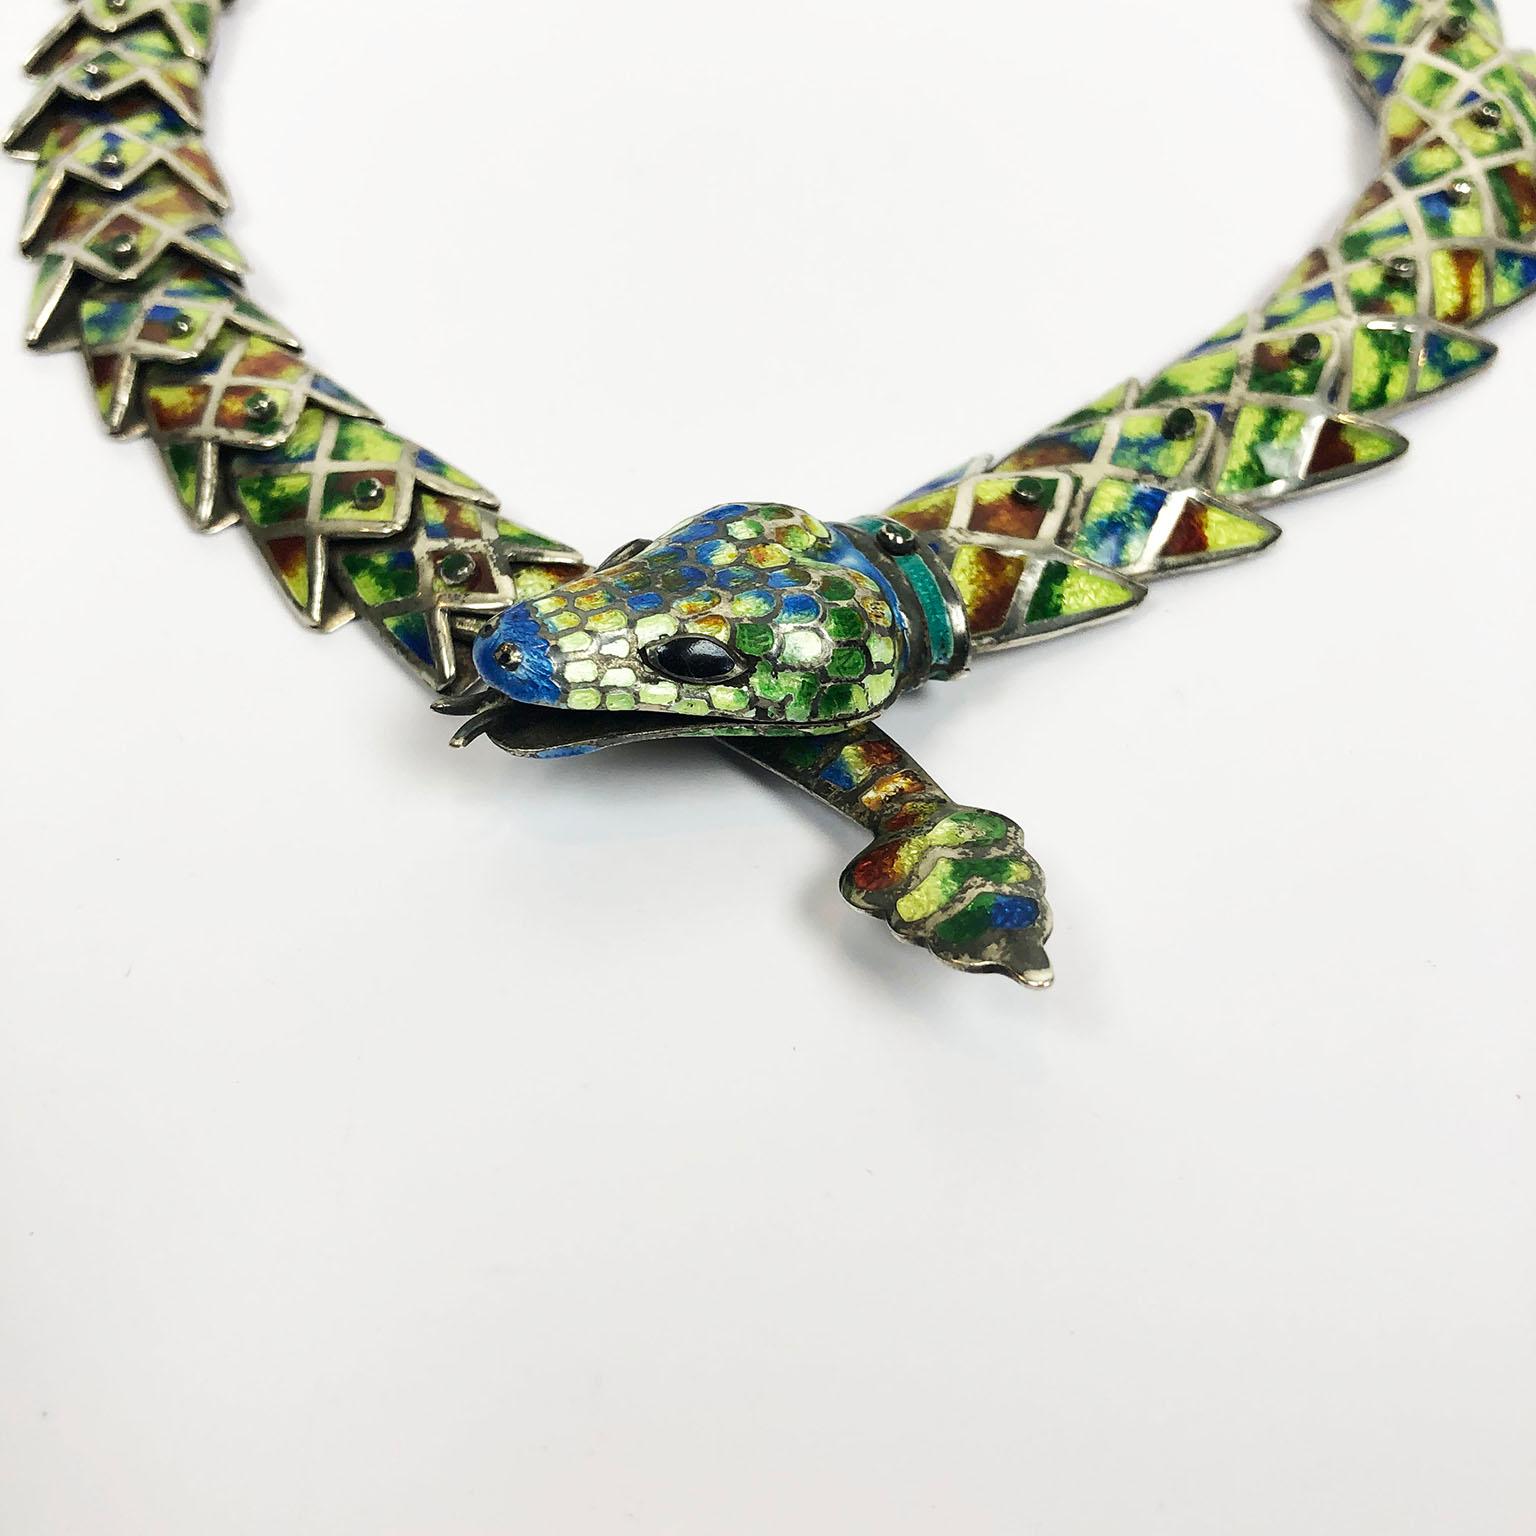 Amazing reticulated snake necklace made of silver in green blue and red enamel with accented raised enamel joints Early mark - Late 1960s. -by Jeronimo Fuentes.

Jeronimo Fuentes was a silversmith who worked for Margot De Taxco and later as